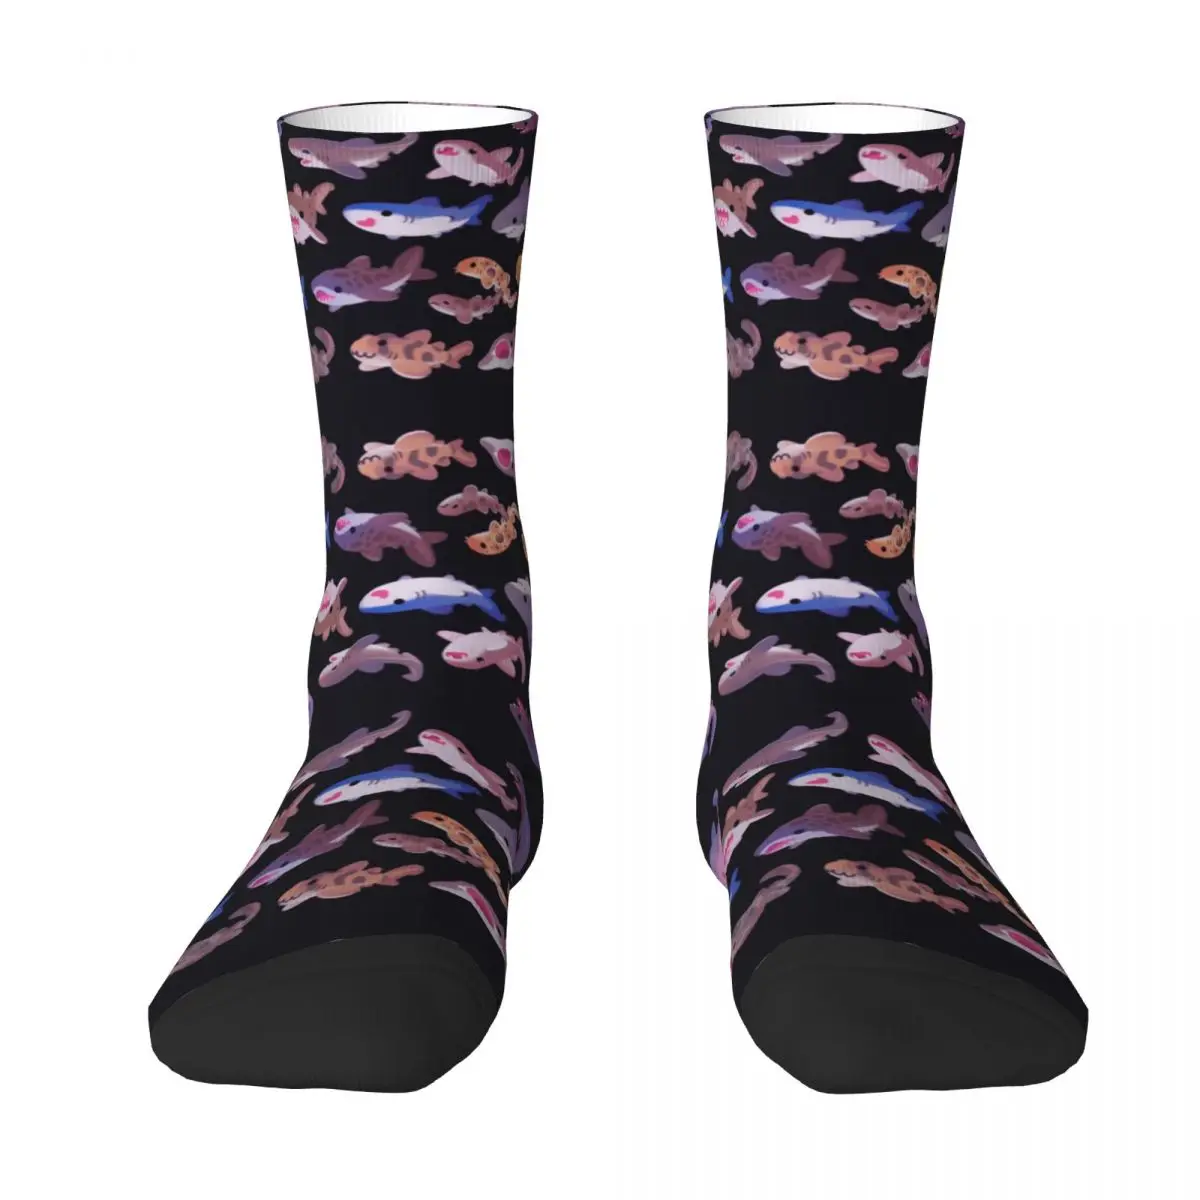 

Shark Day R92 Stocking Funny Graphic BEST TO BUY Contrast color Rucksack Humor Graphic Compression Socks